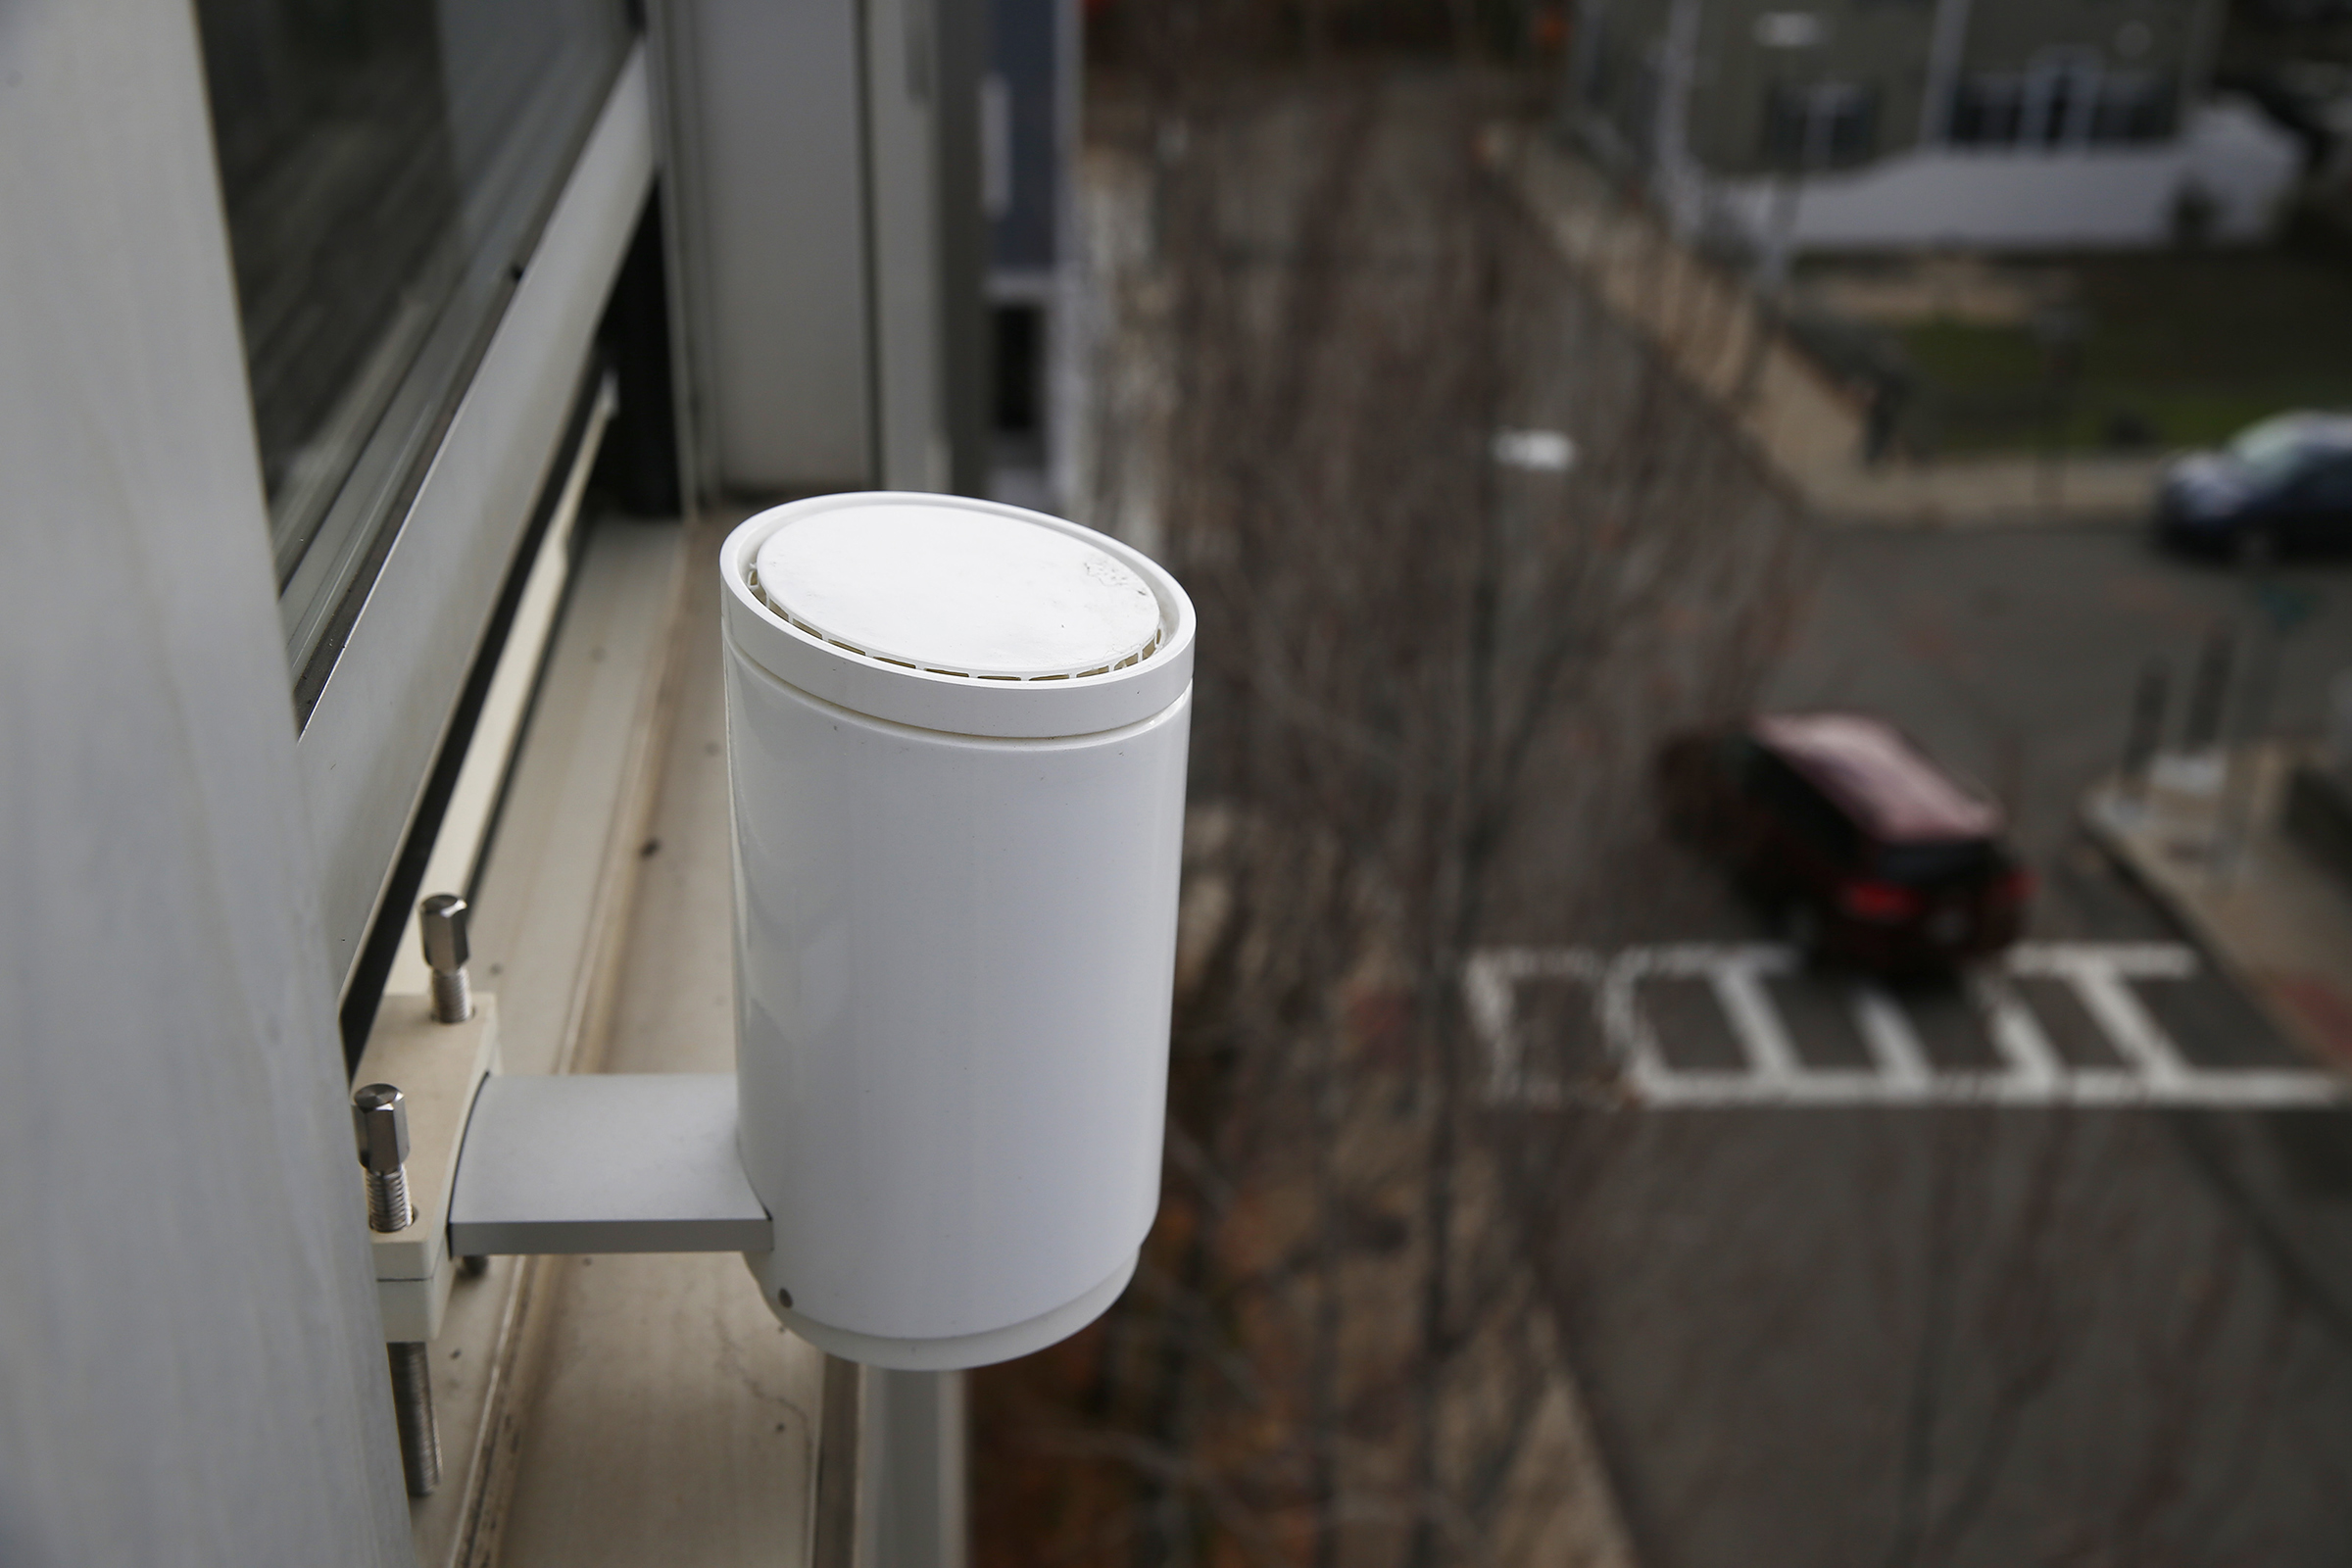 A Starry point wireless router that would serve local wifi for the new high-speed wireless broadband service is seen outside of the window at Starry Internet in Boston. (Jessica Rinaldi—The Boston Globe/Getty Images)